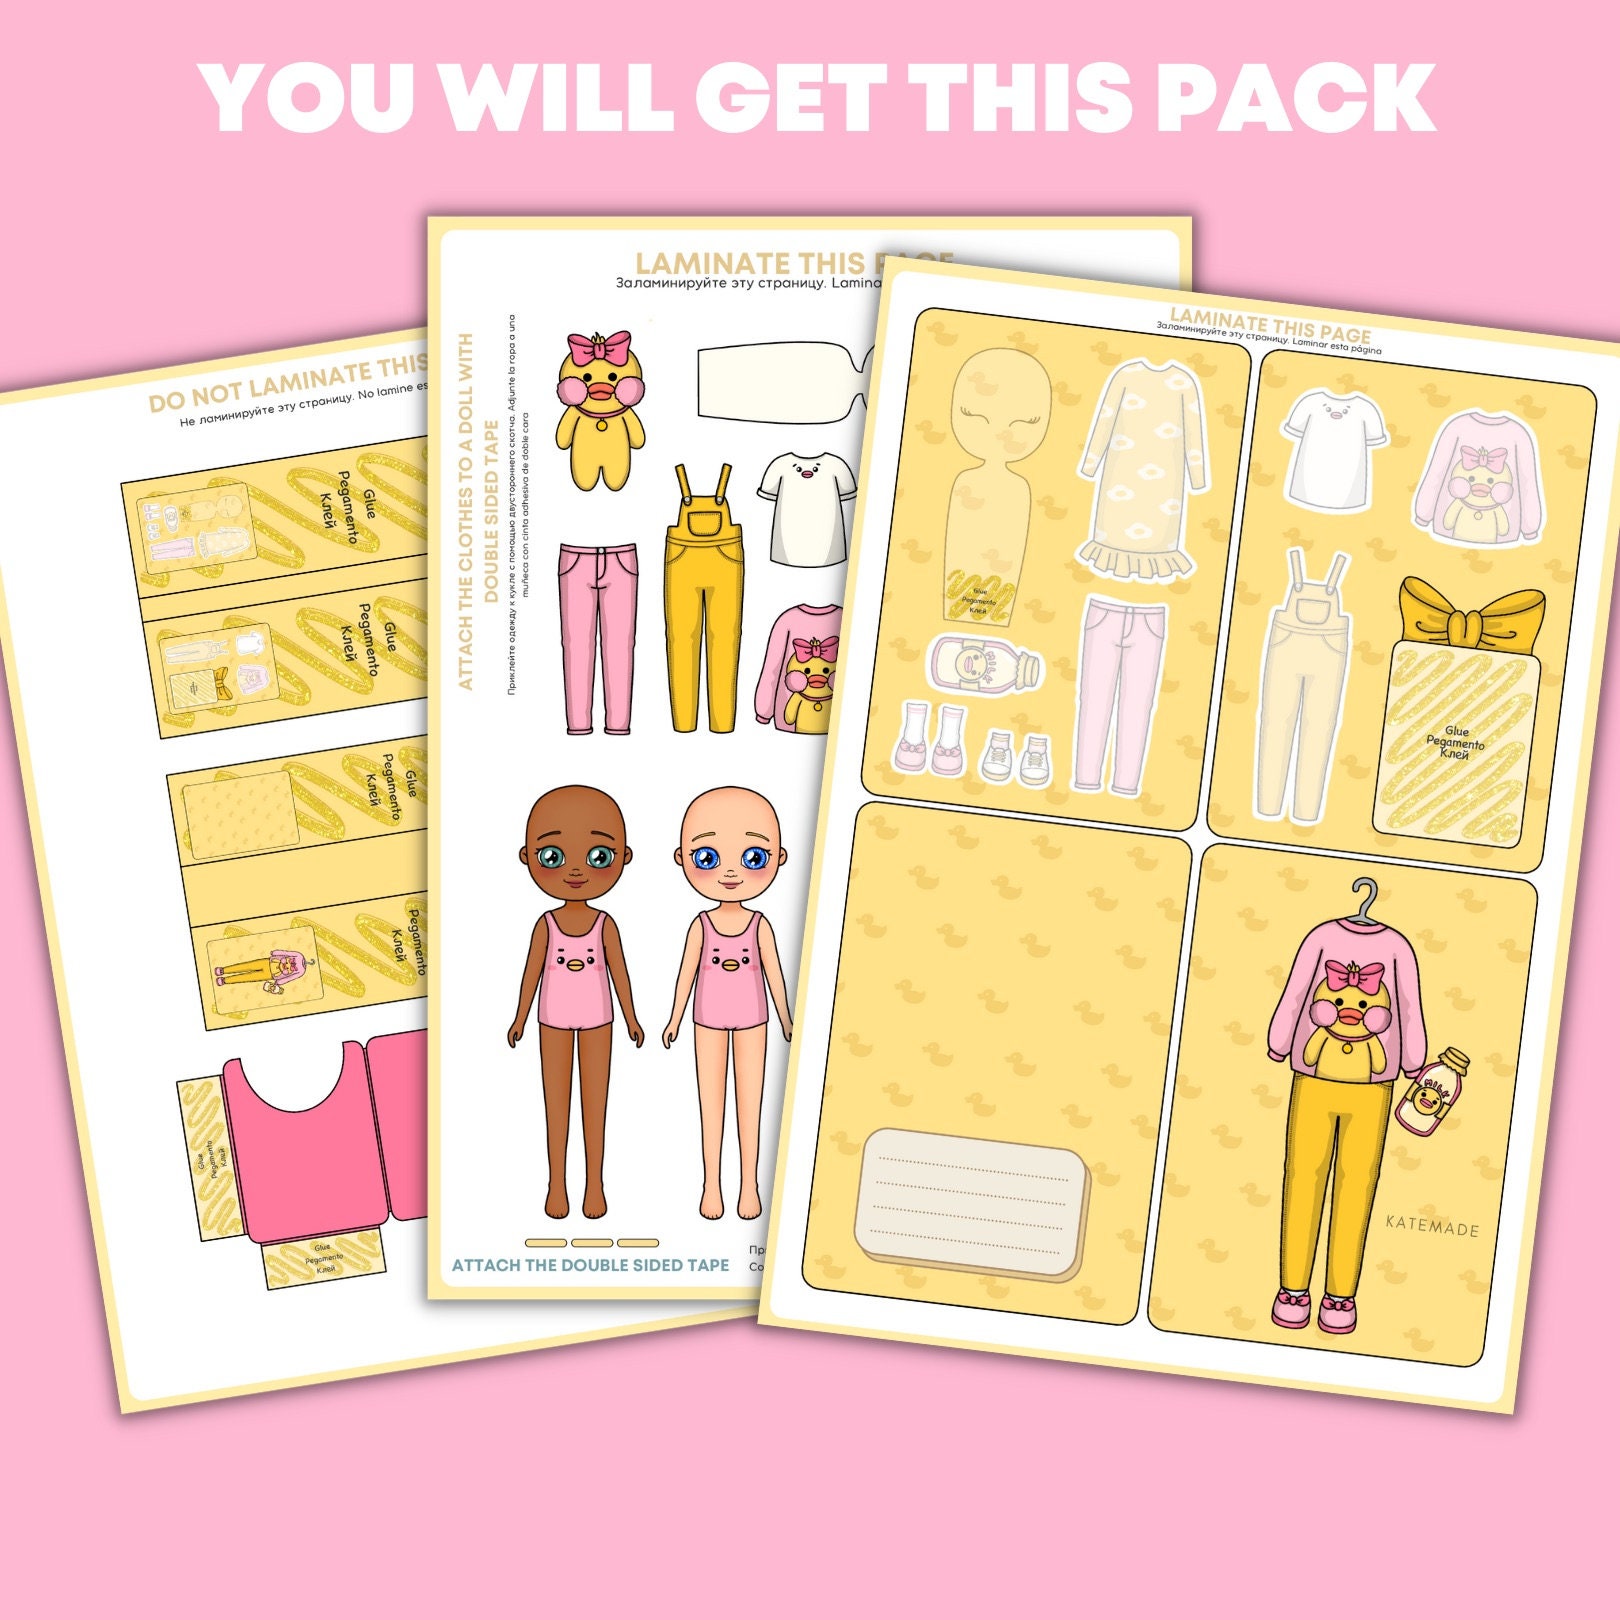 Easy Guide on How to Make Paper Dolls at Home - JAM Paper Blog